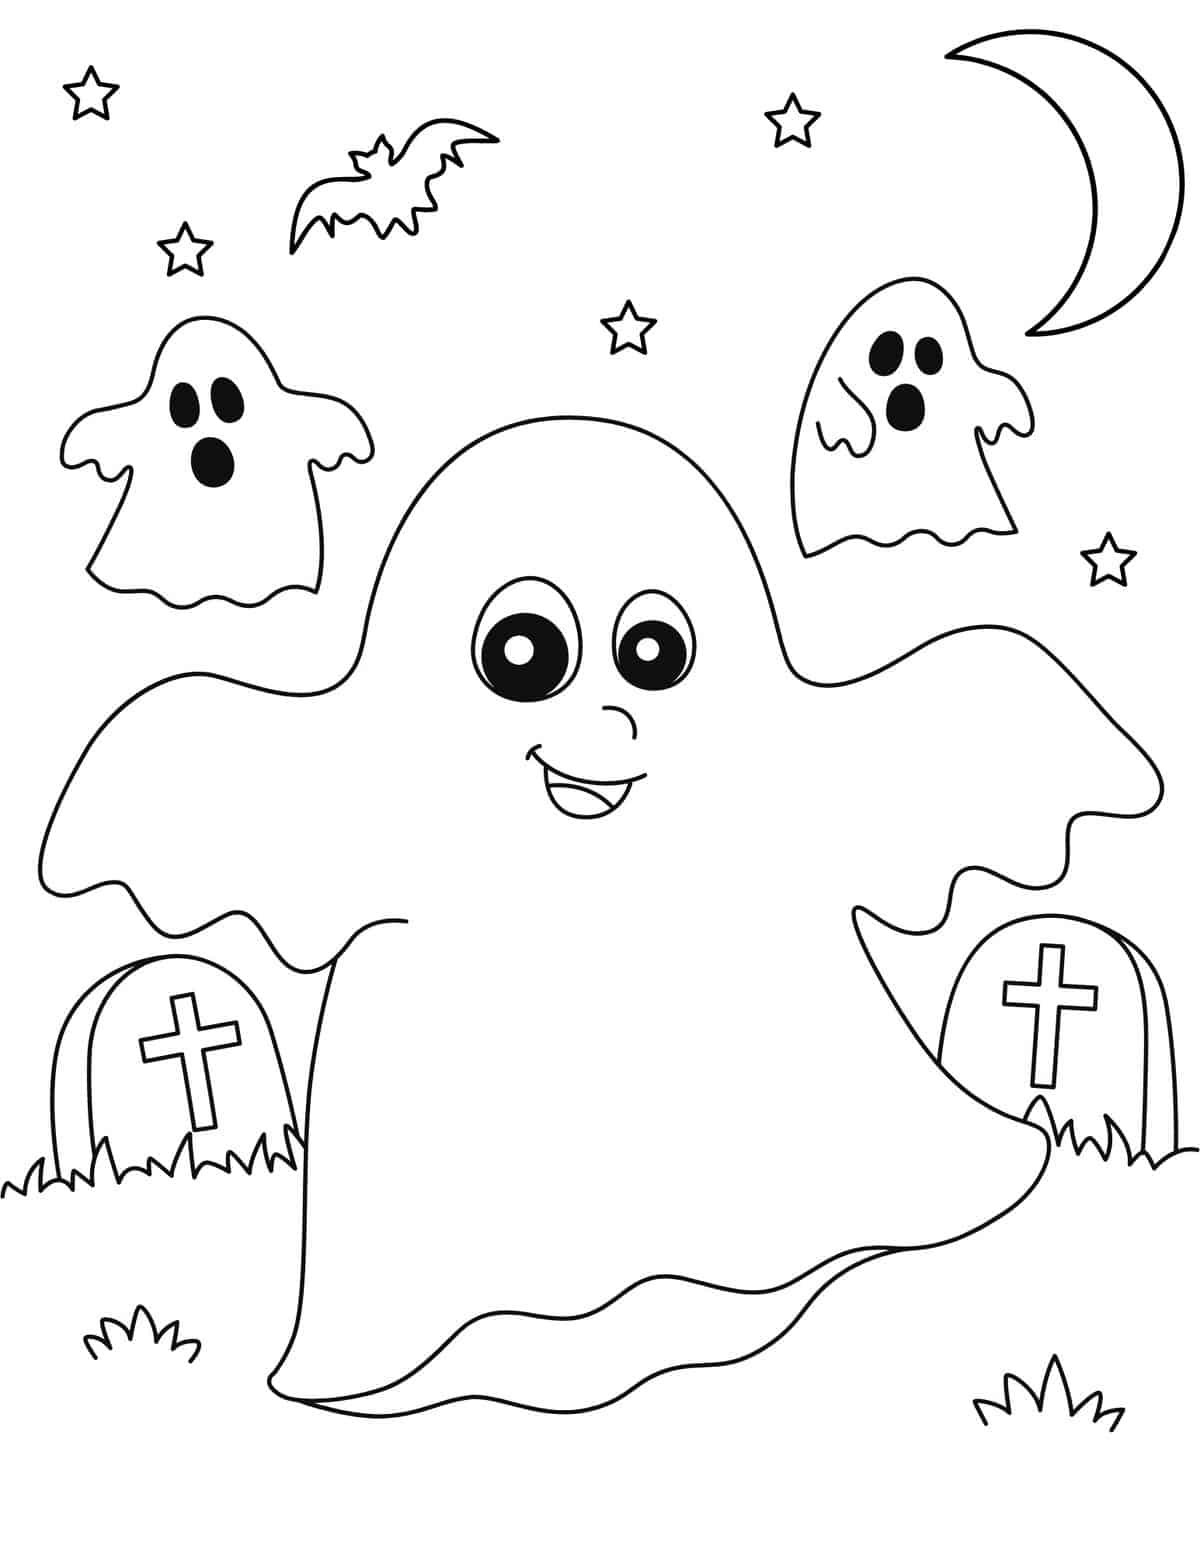 ghosts in graveyard halloween coloring page